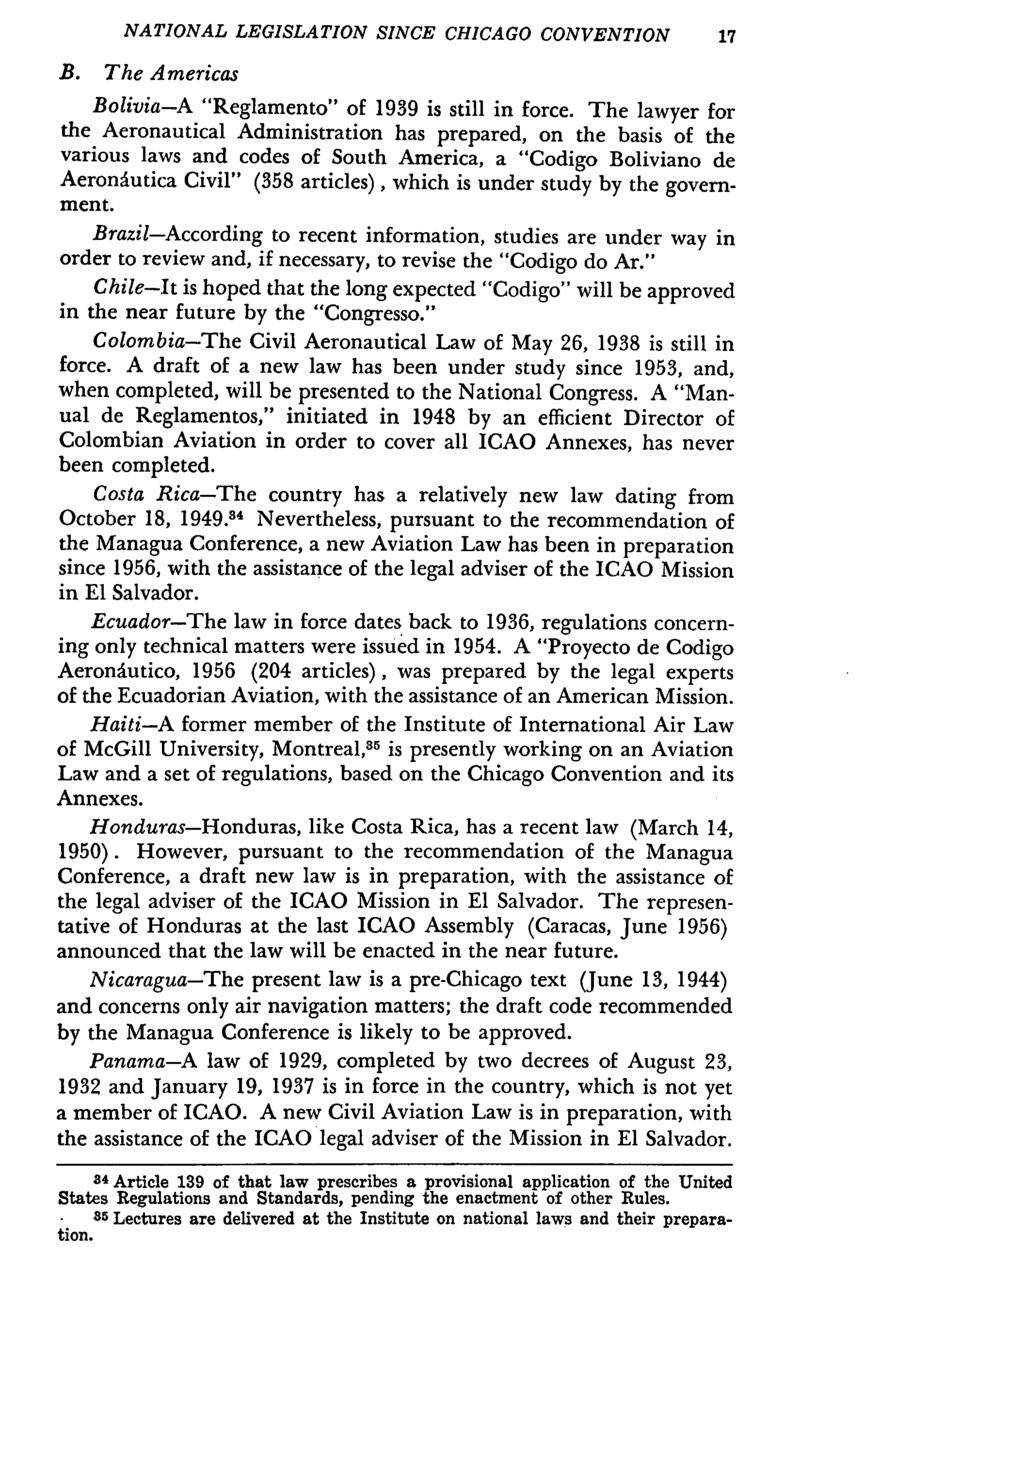 NATIONAL LEGISLATION SINCE CHICAGO CONVENTION 17 B. The Americas Bolivia-A "Reglamento" of 1939 is still in force.